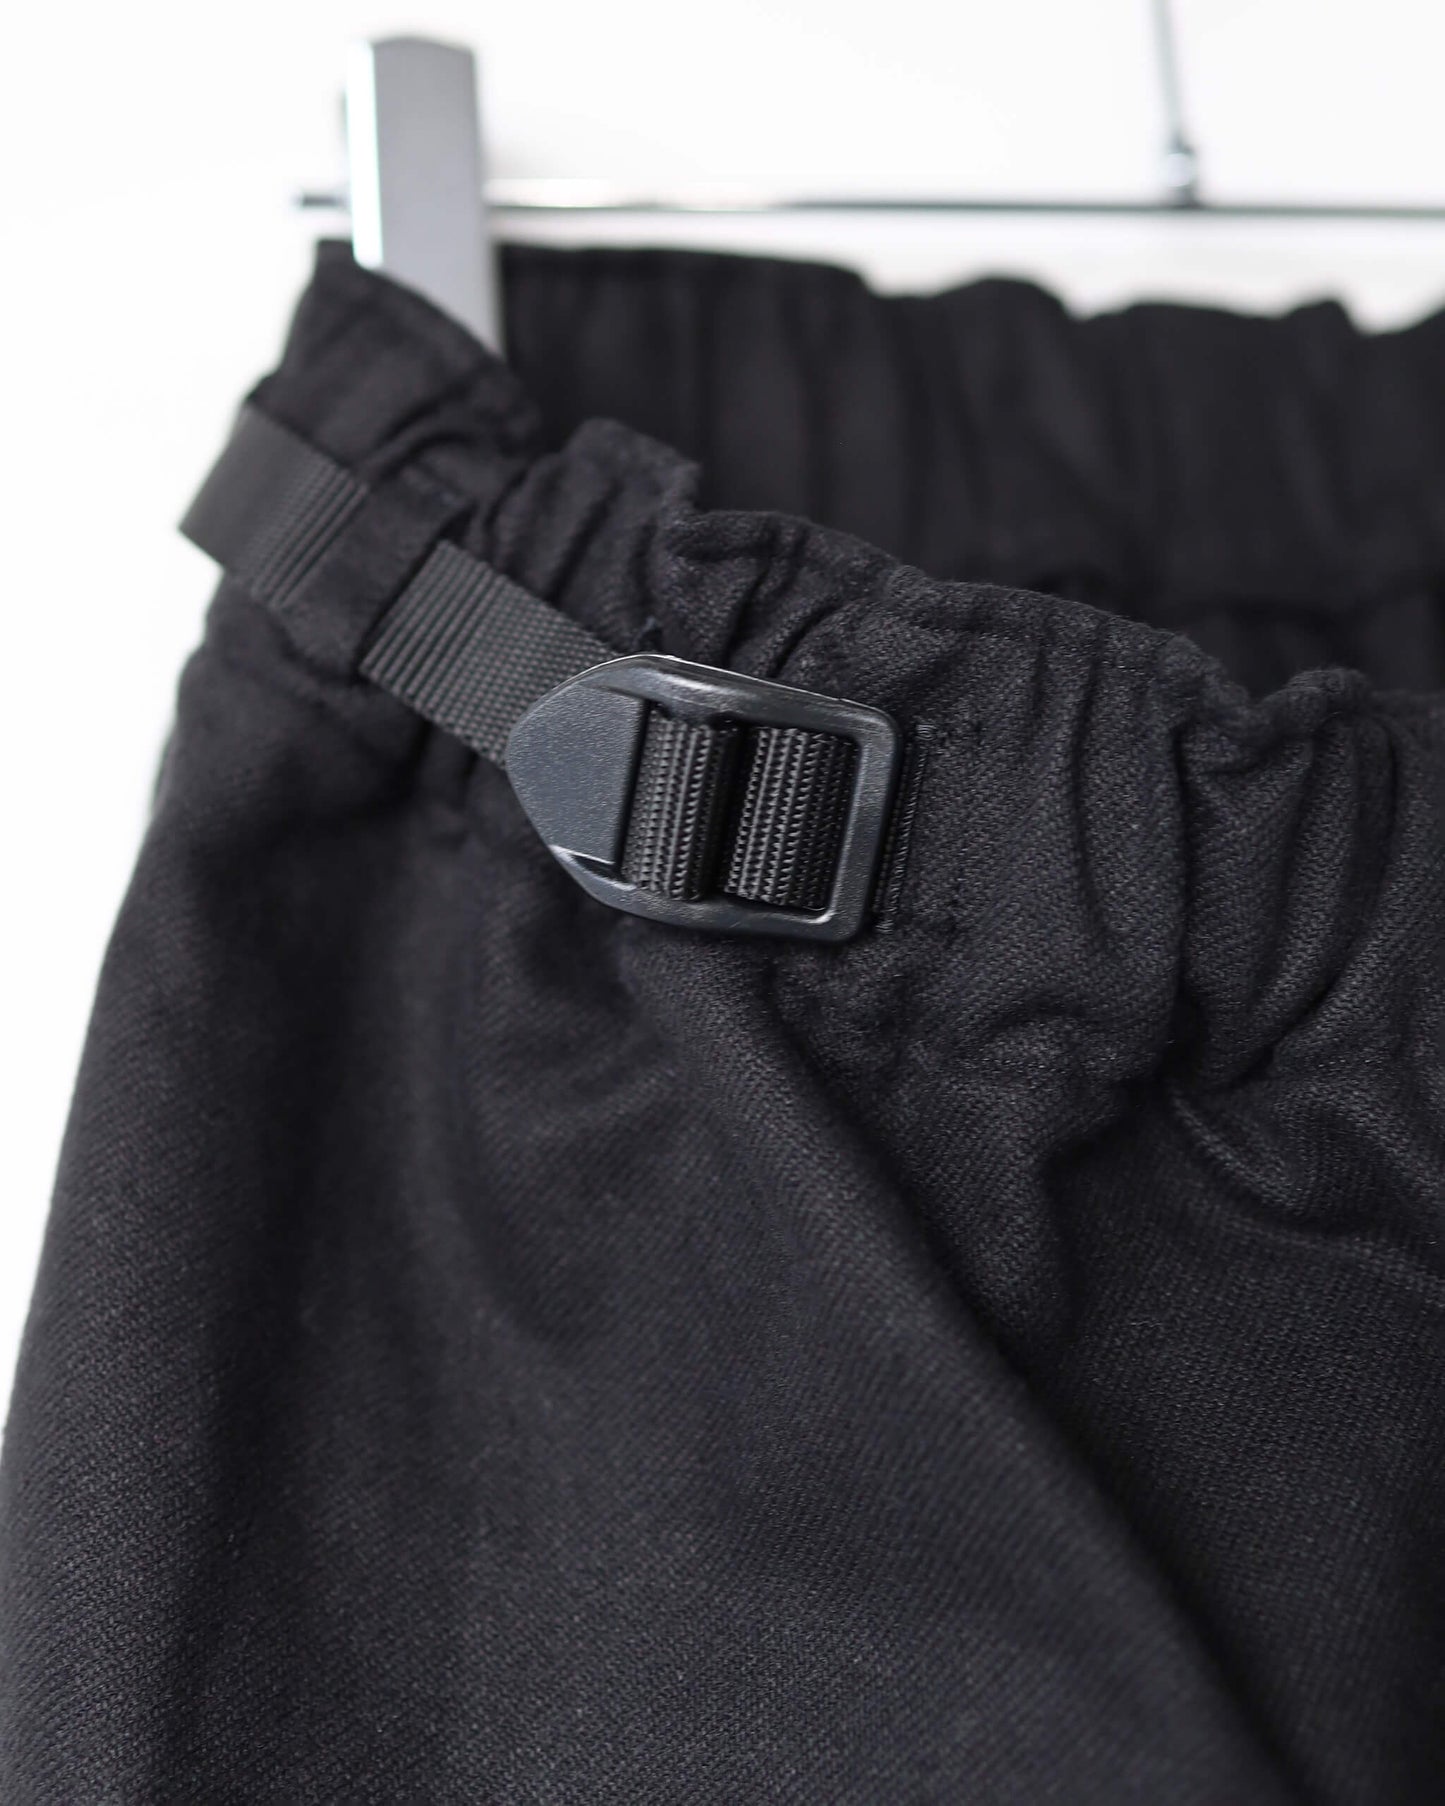 BELTED TROUSERS TYPE 3 "BLACK"